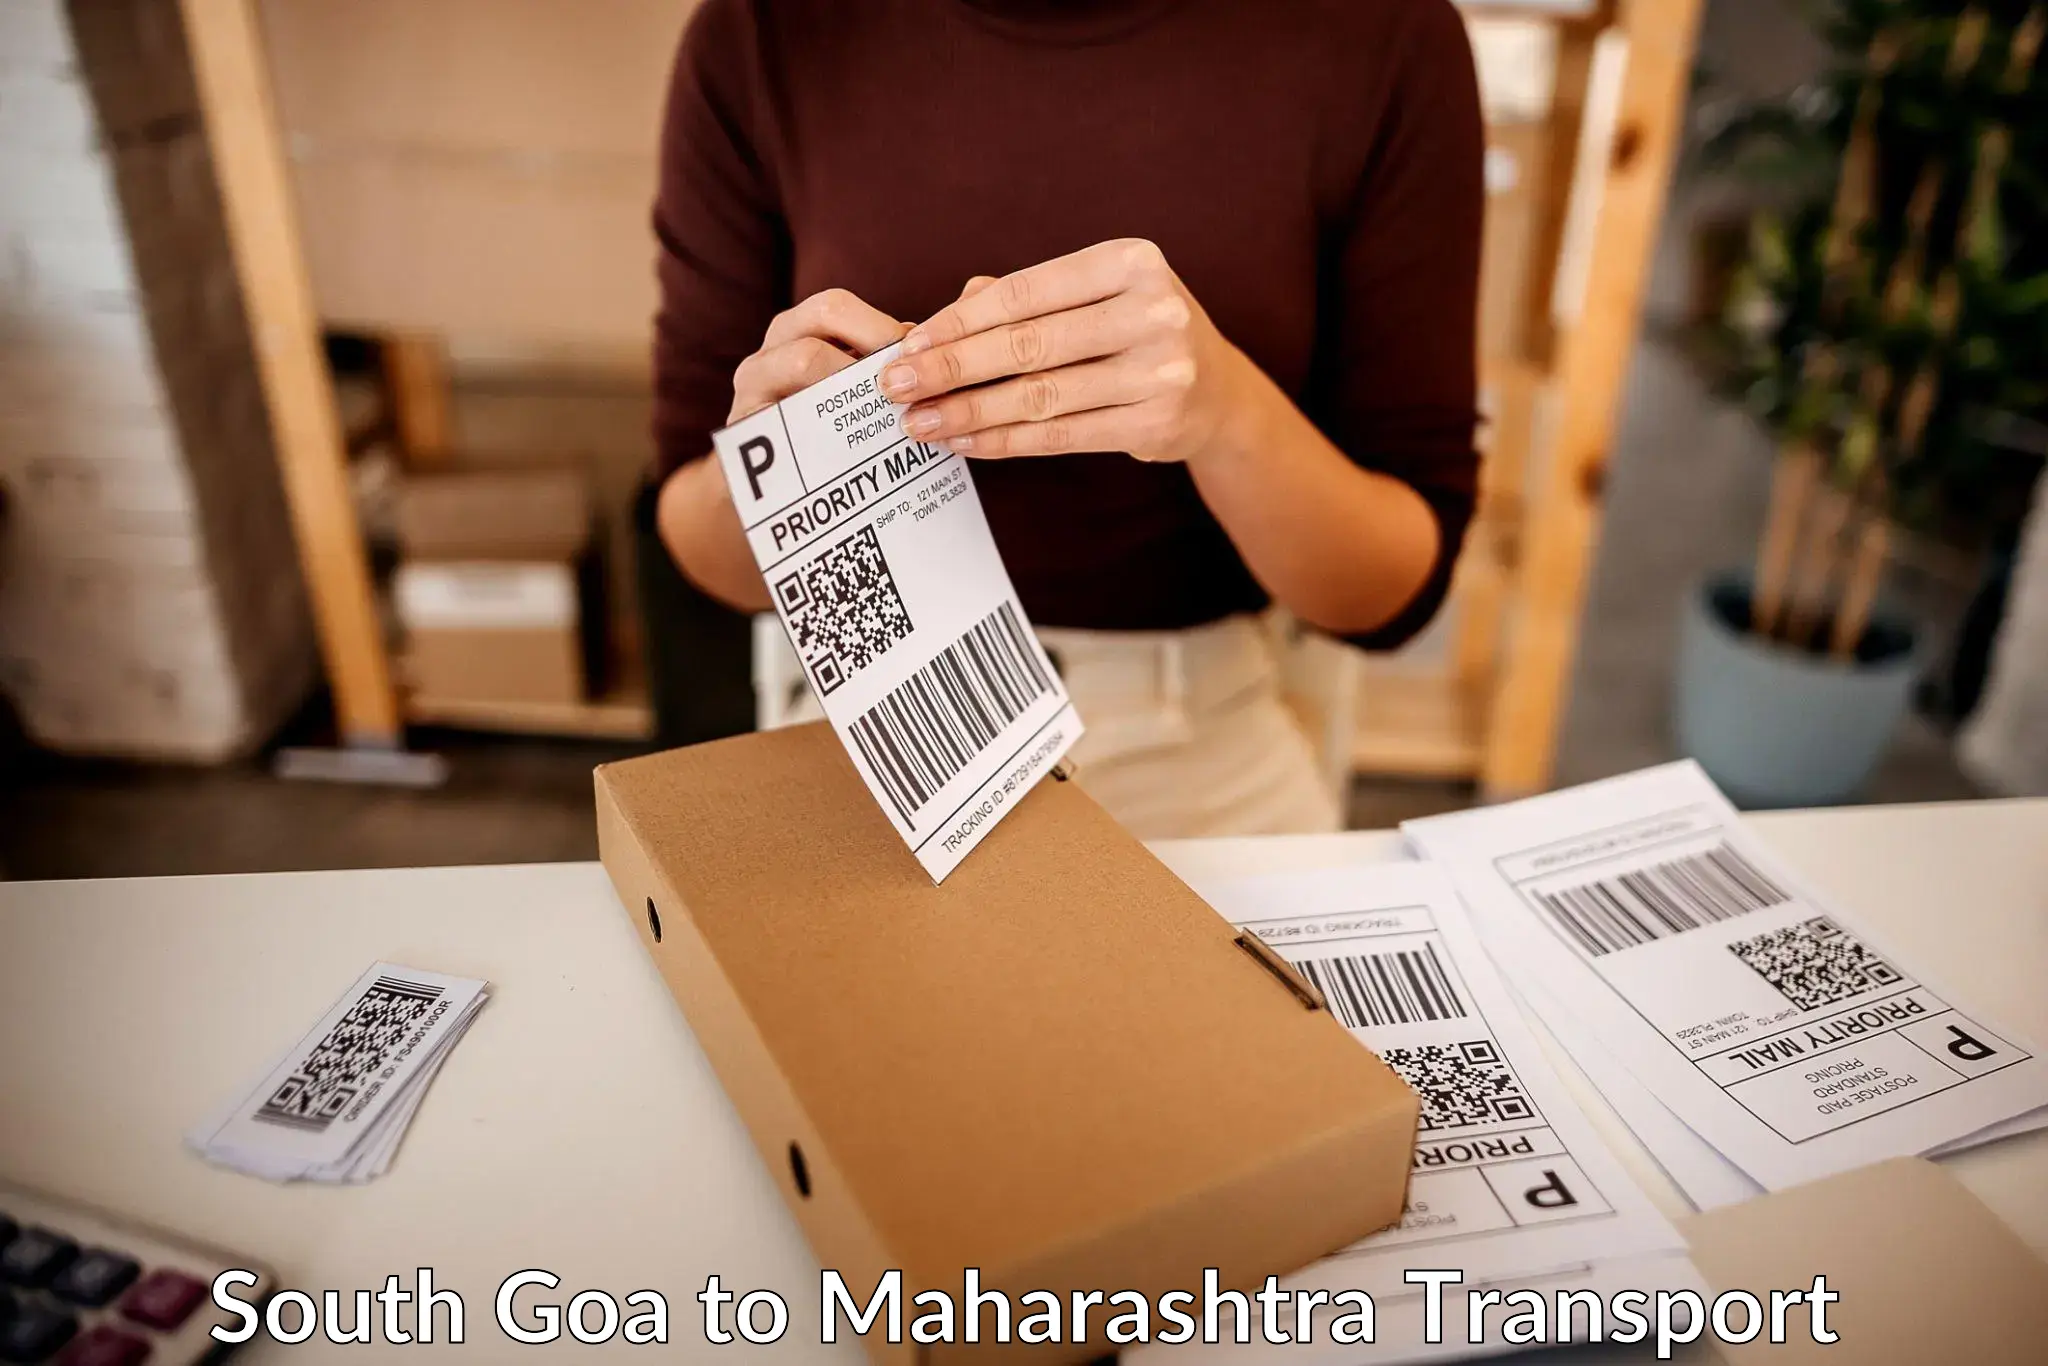 Domestic goods transportation services South Goa to Tuljapur